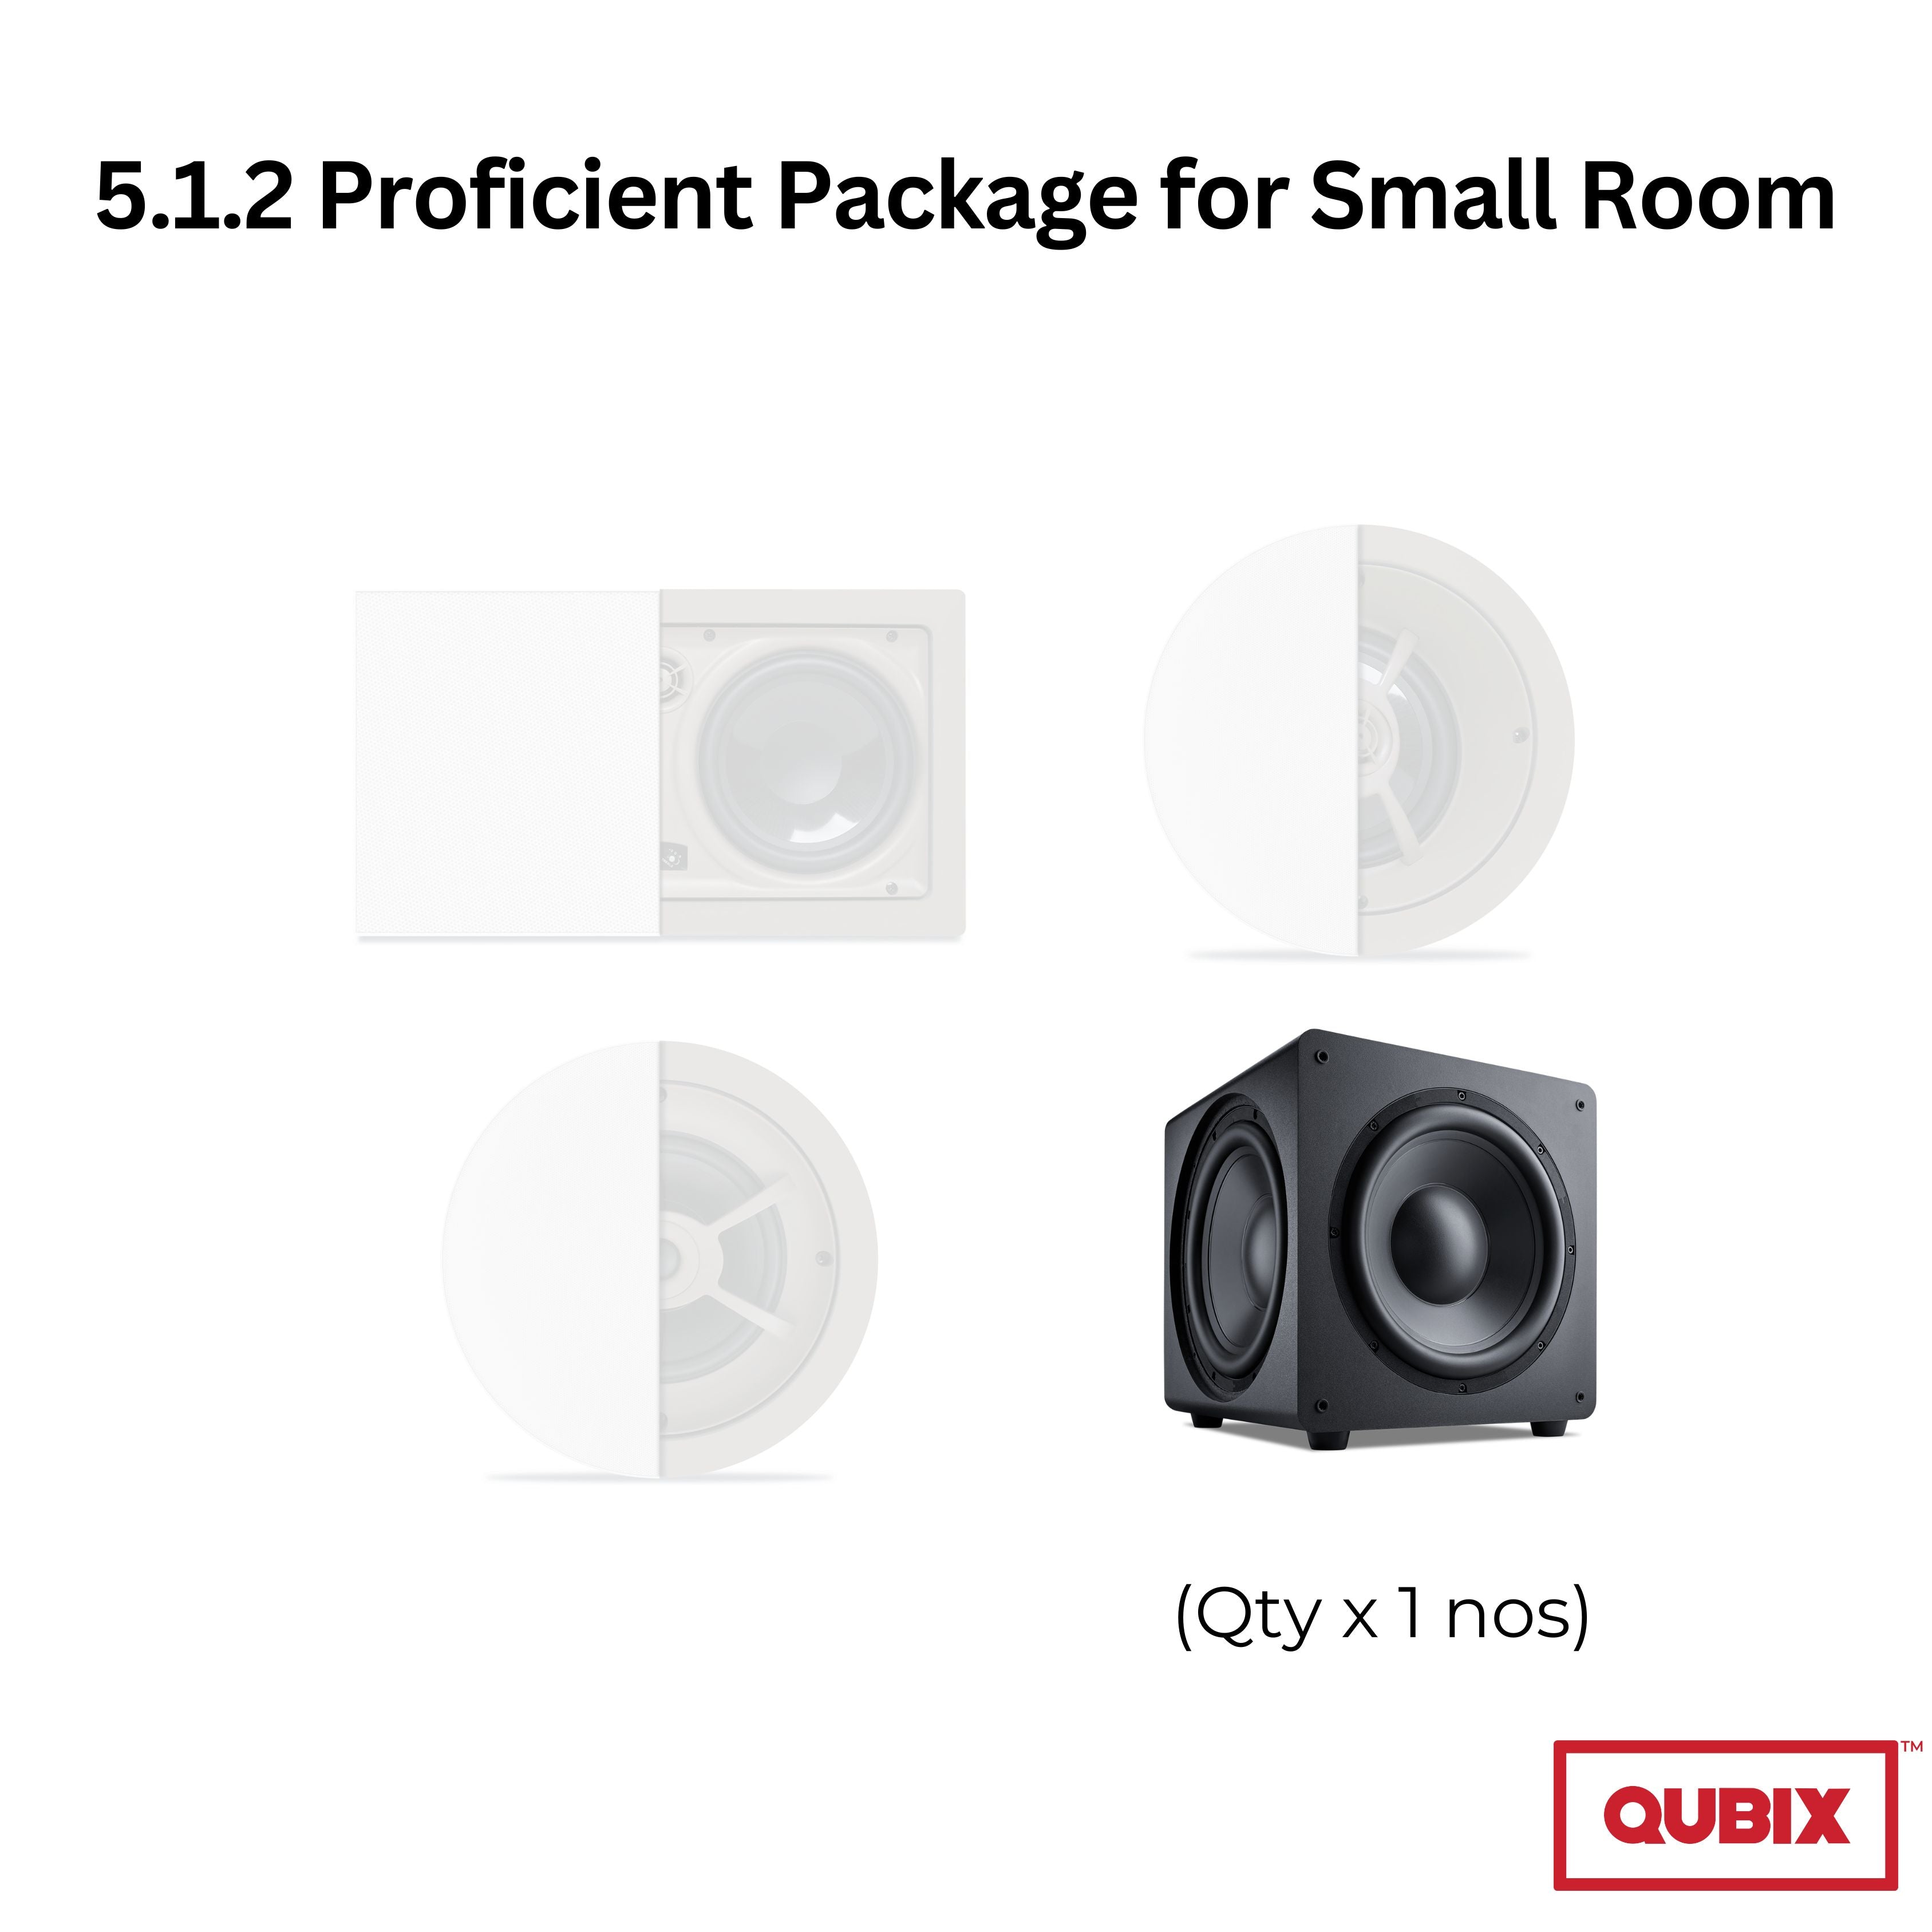 5.1.2 Proficient Package for Small Room